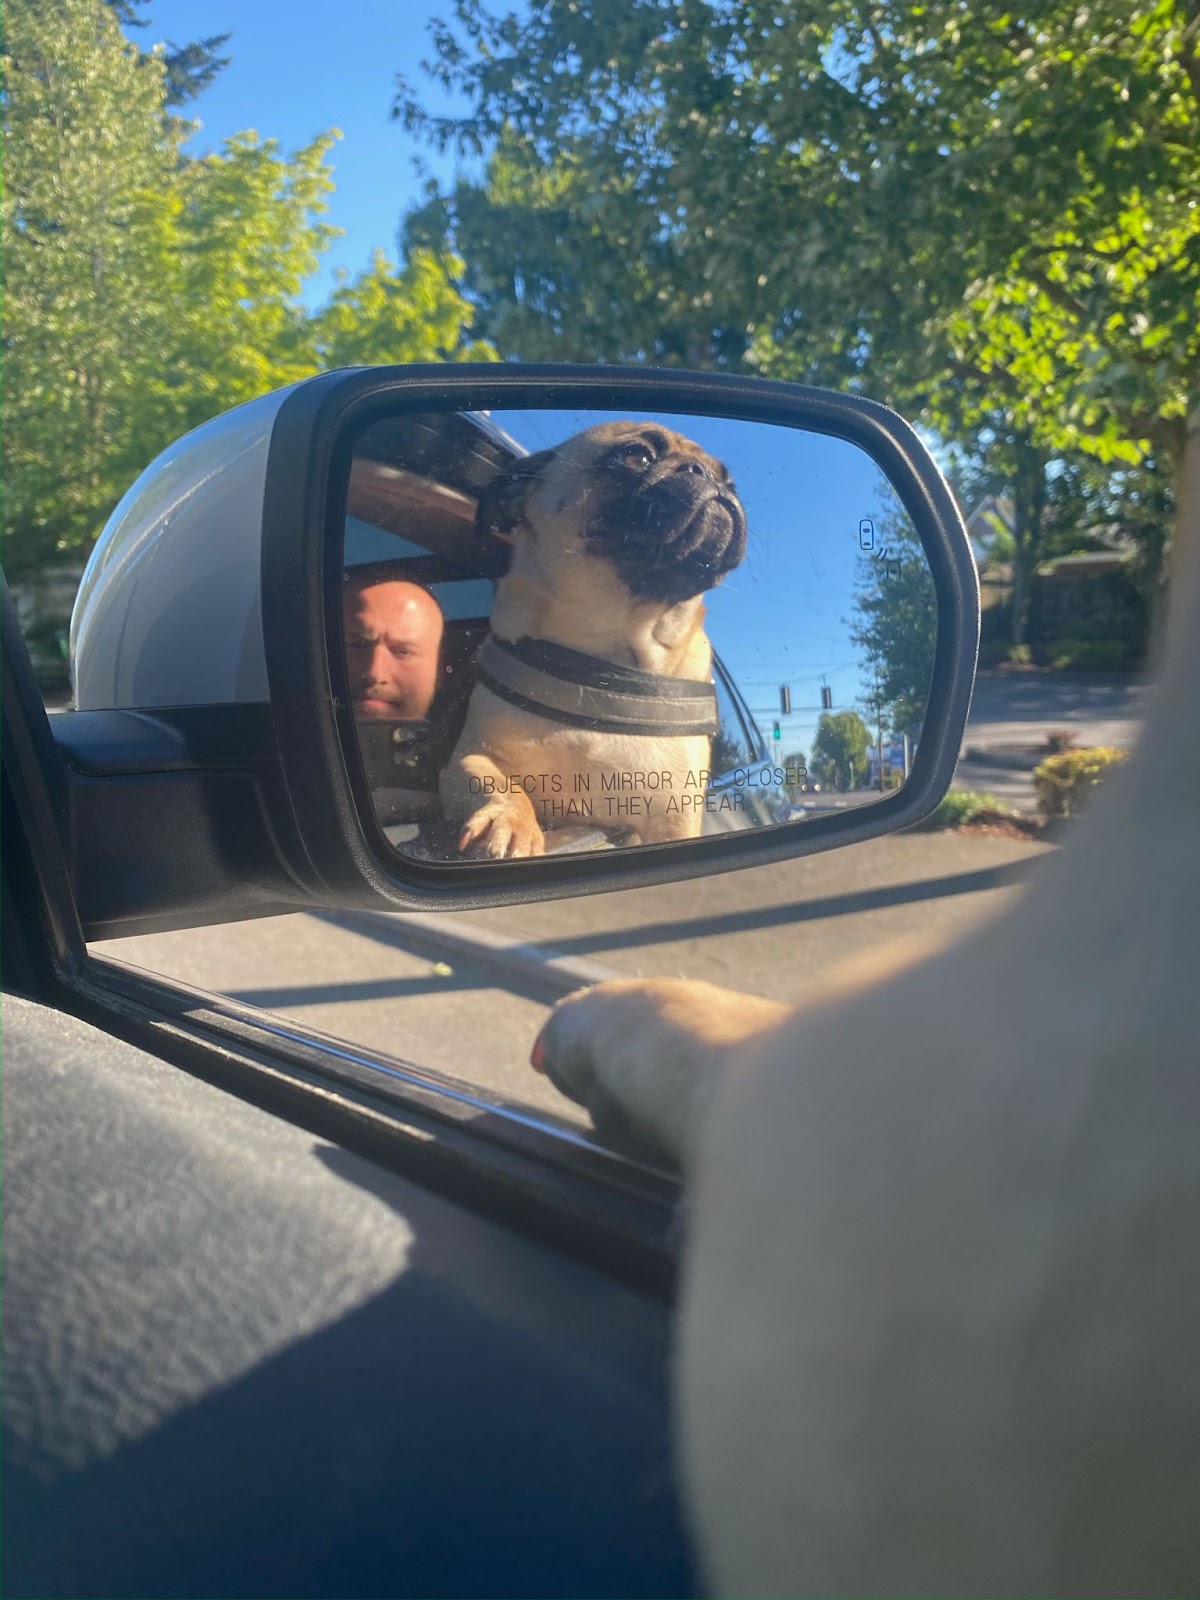 Reflection in a car's side mirror of a pug sitting in the passenger seat driving through the city and enjoying the sights outside